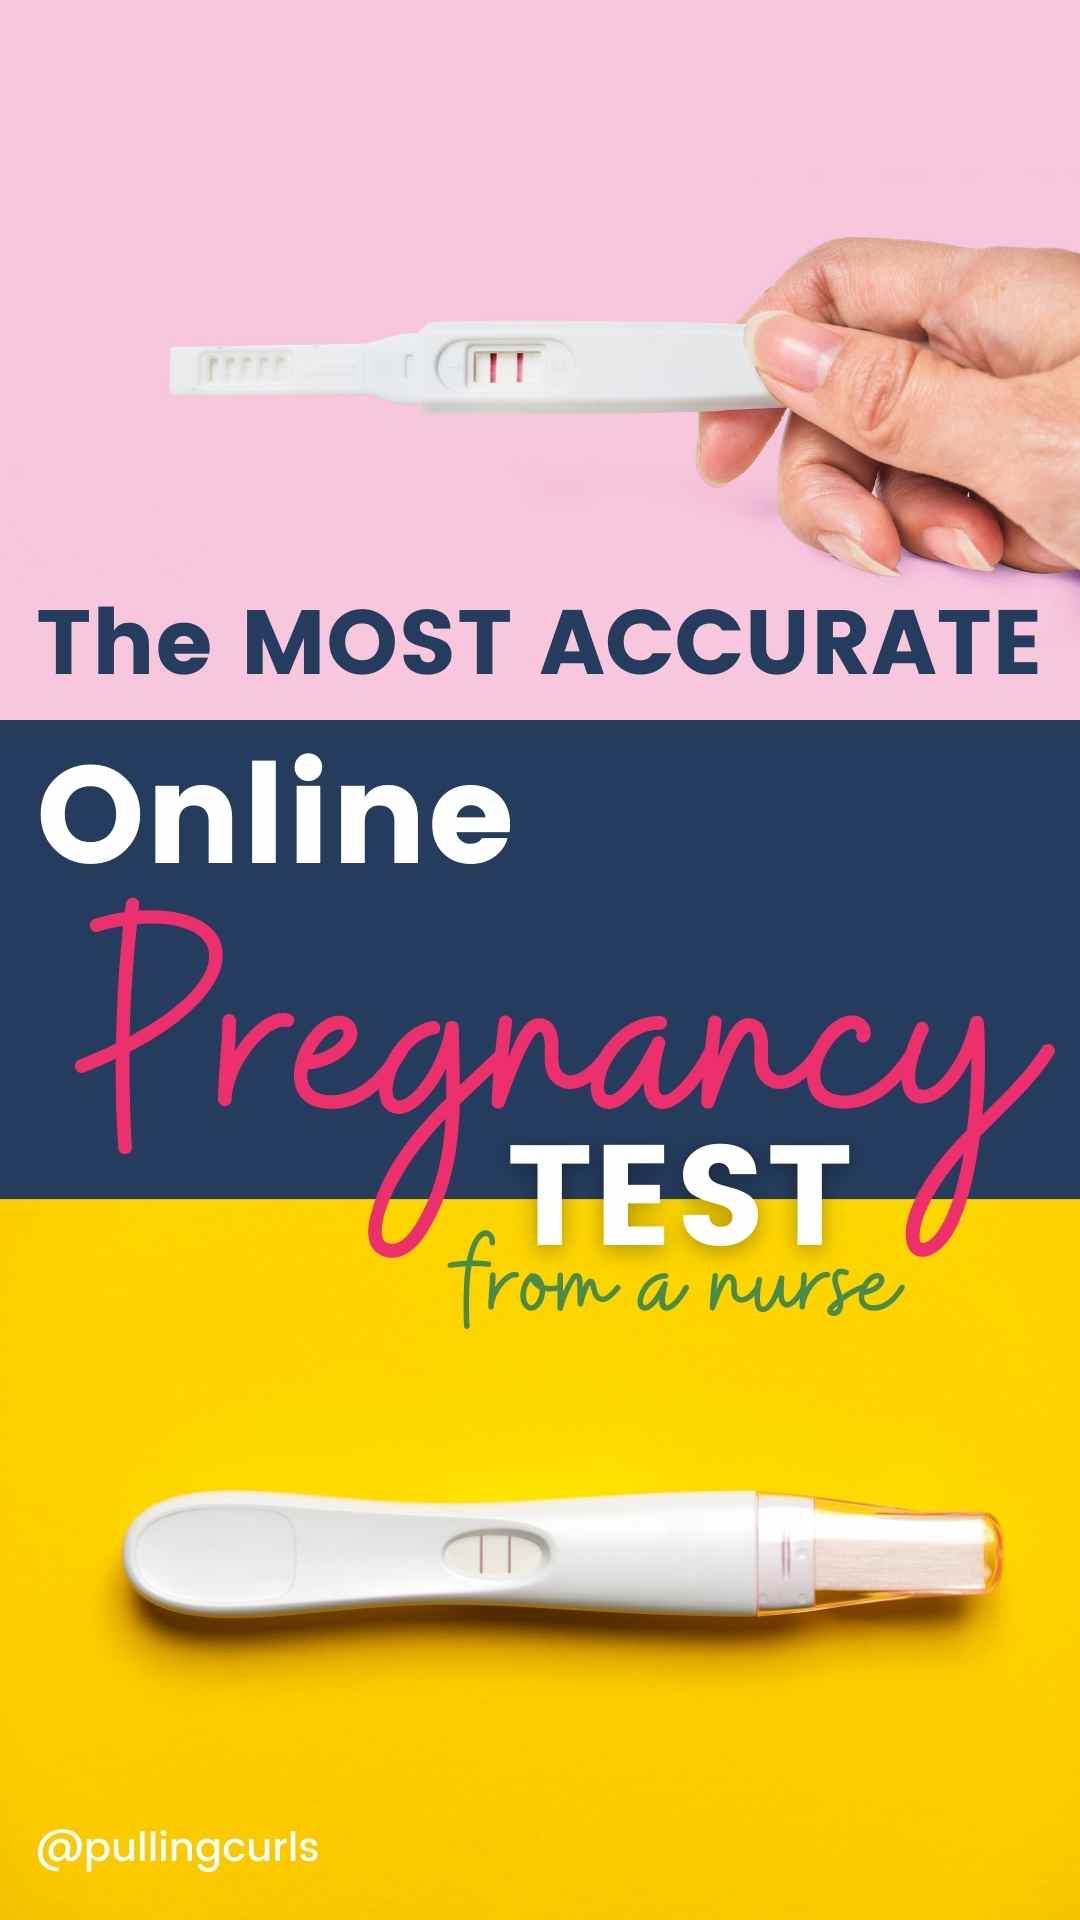 This online pregnancy test is the most accurate one you will find. Find out common early pregnancy symptoms to consider before going and getting a home pregnancy test. via @pullingcurls